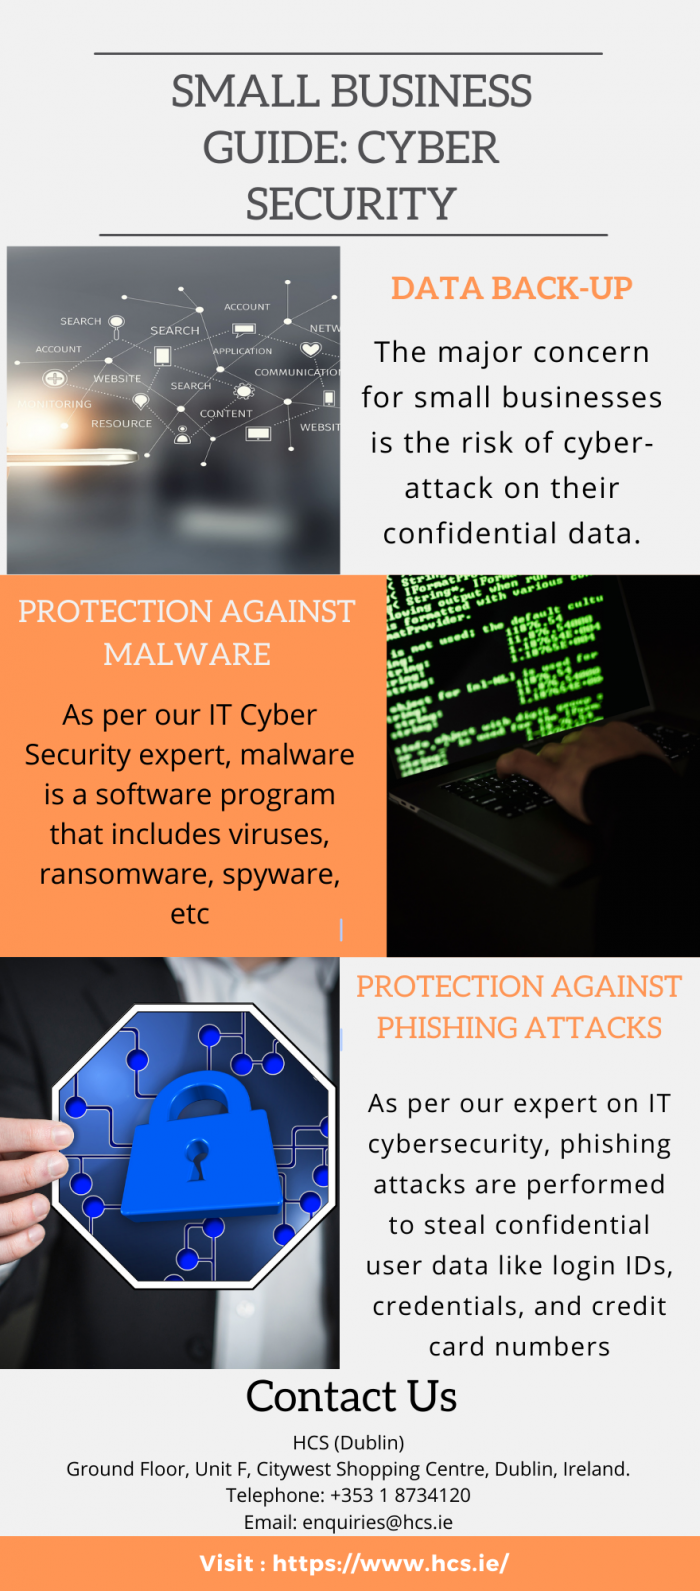 SMALL BUSINESS GUIDE: CYBER SECURITY